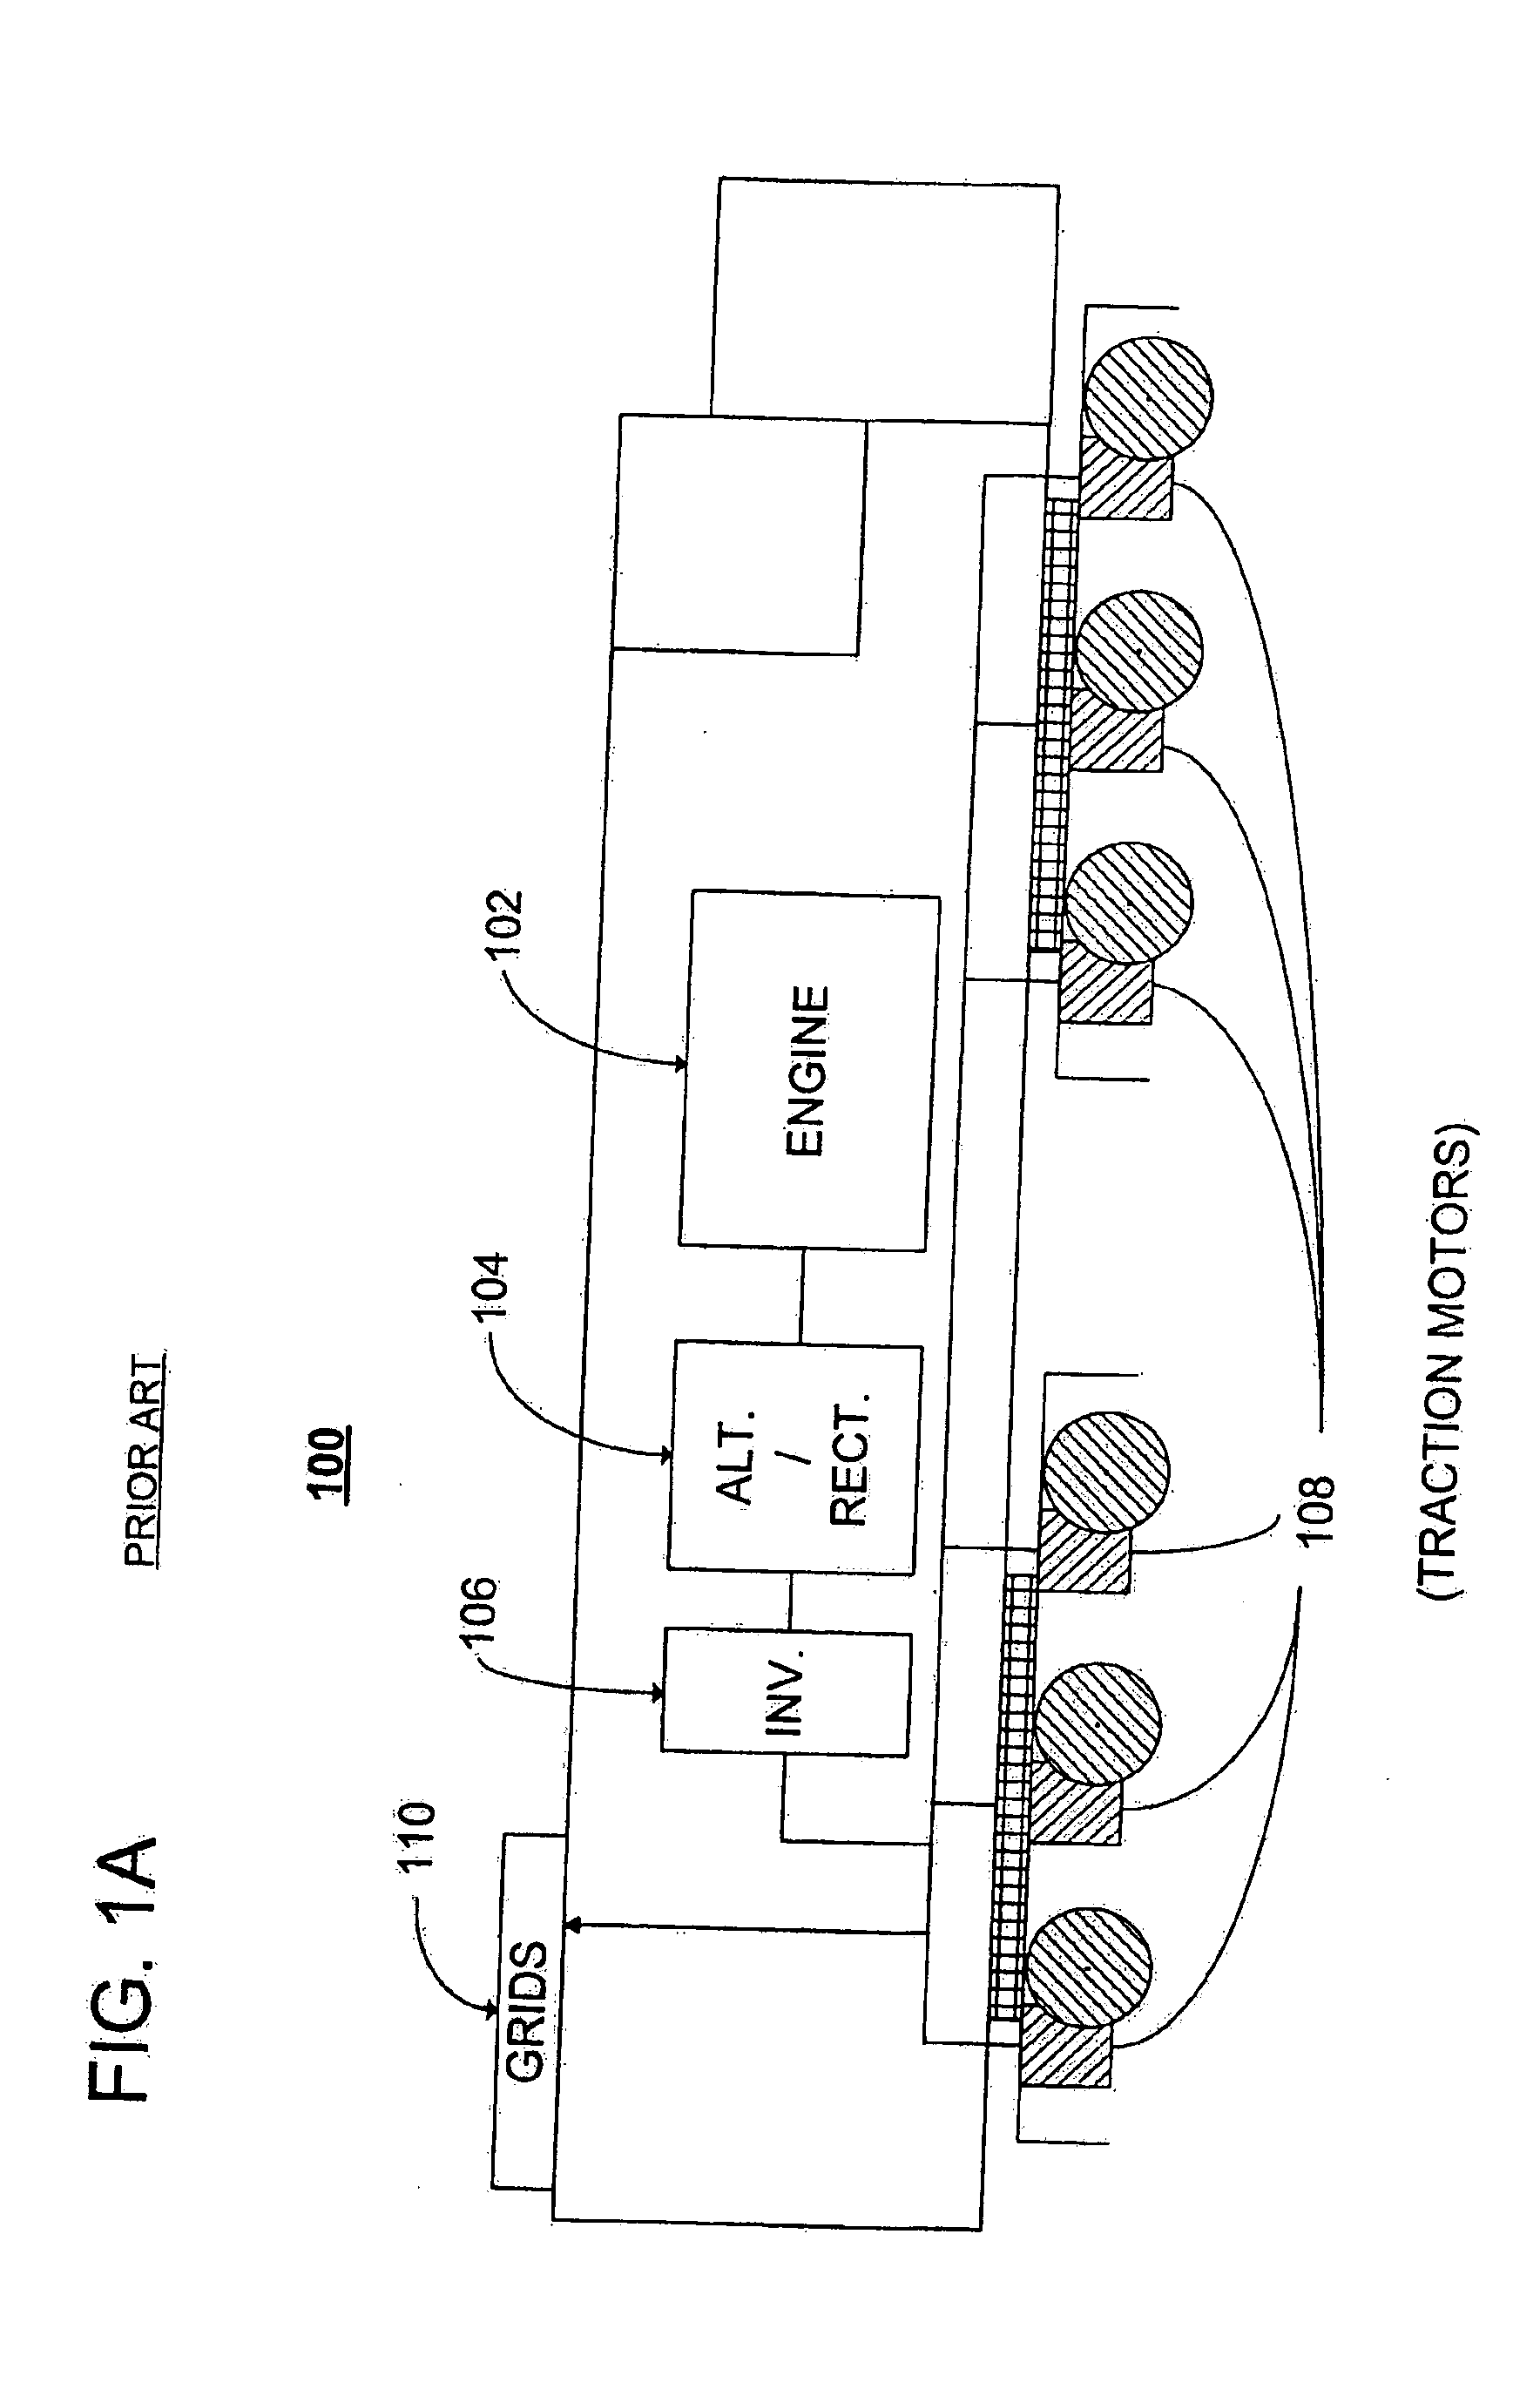 Railroad system comprising railroad vehicle with energy regeneration